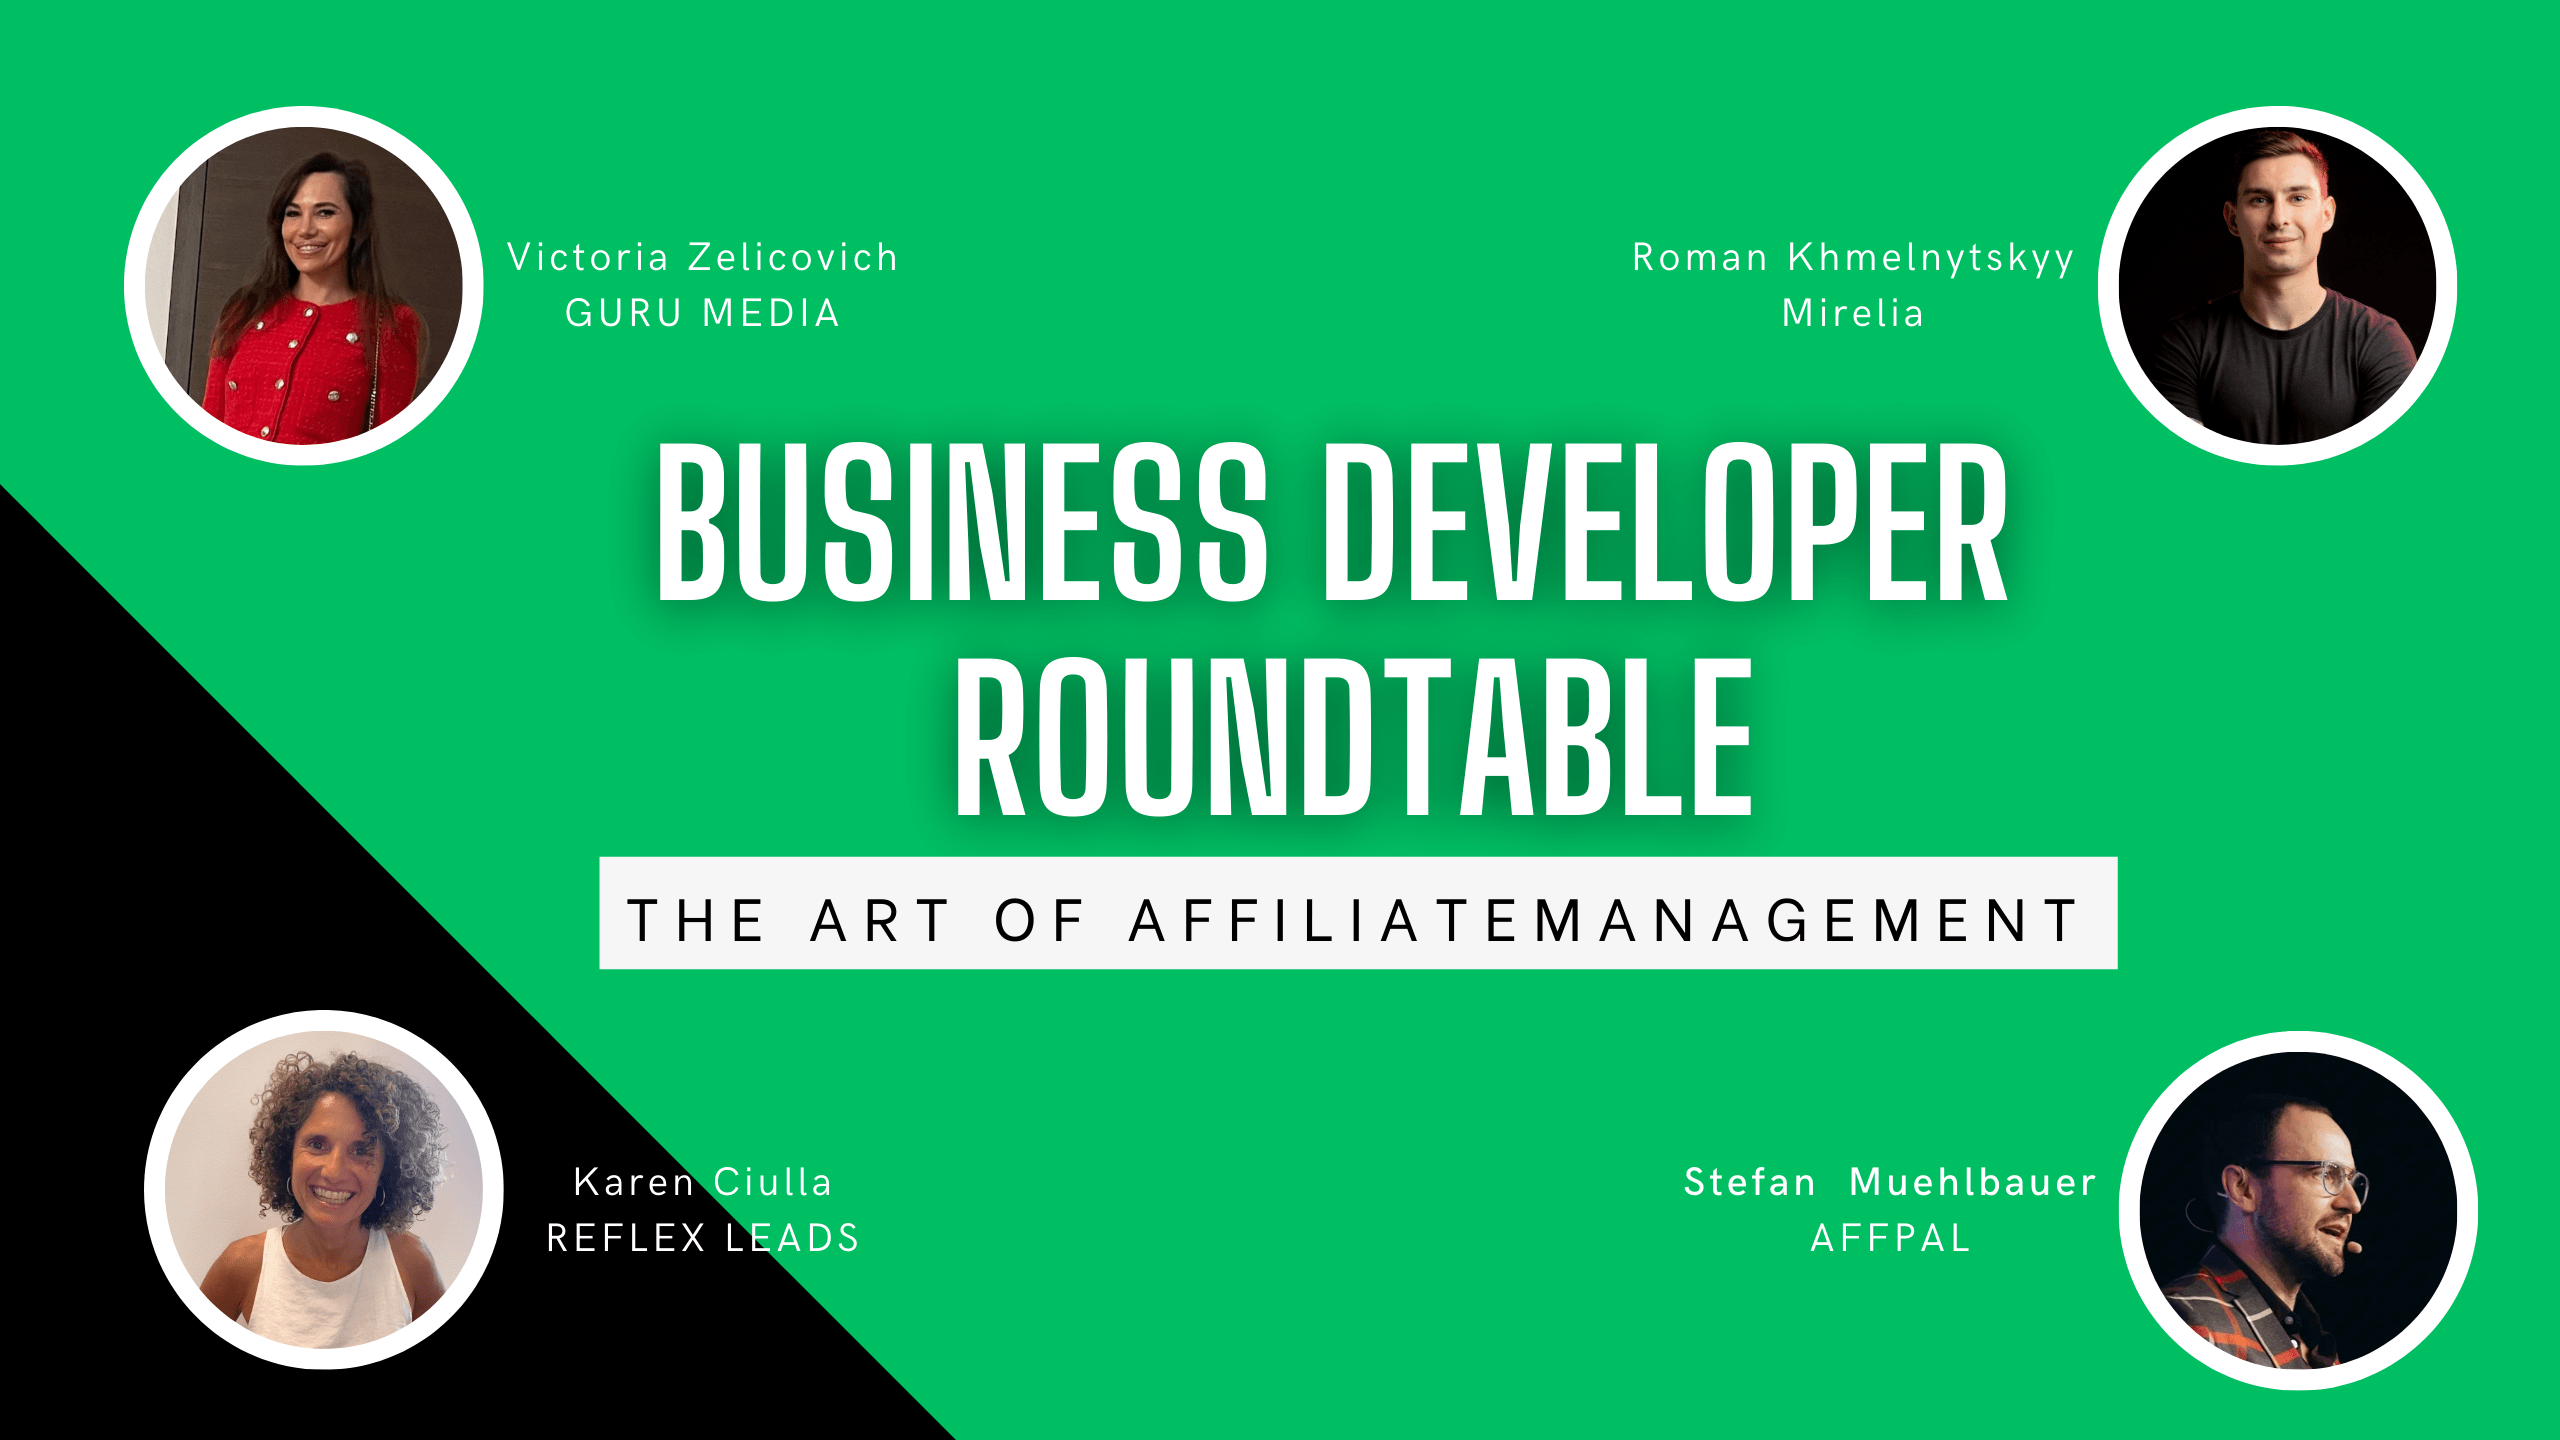 Video: Business Development Round Table